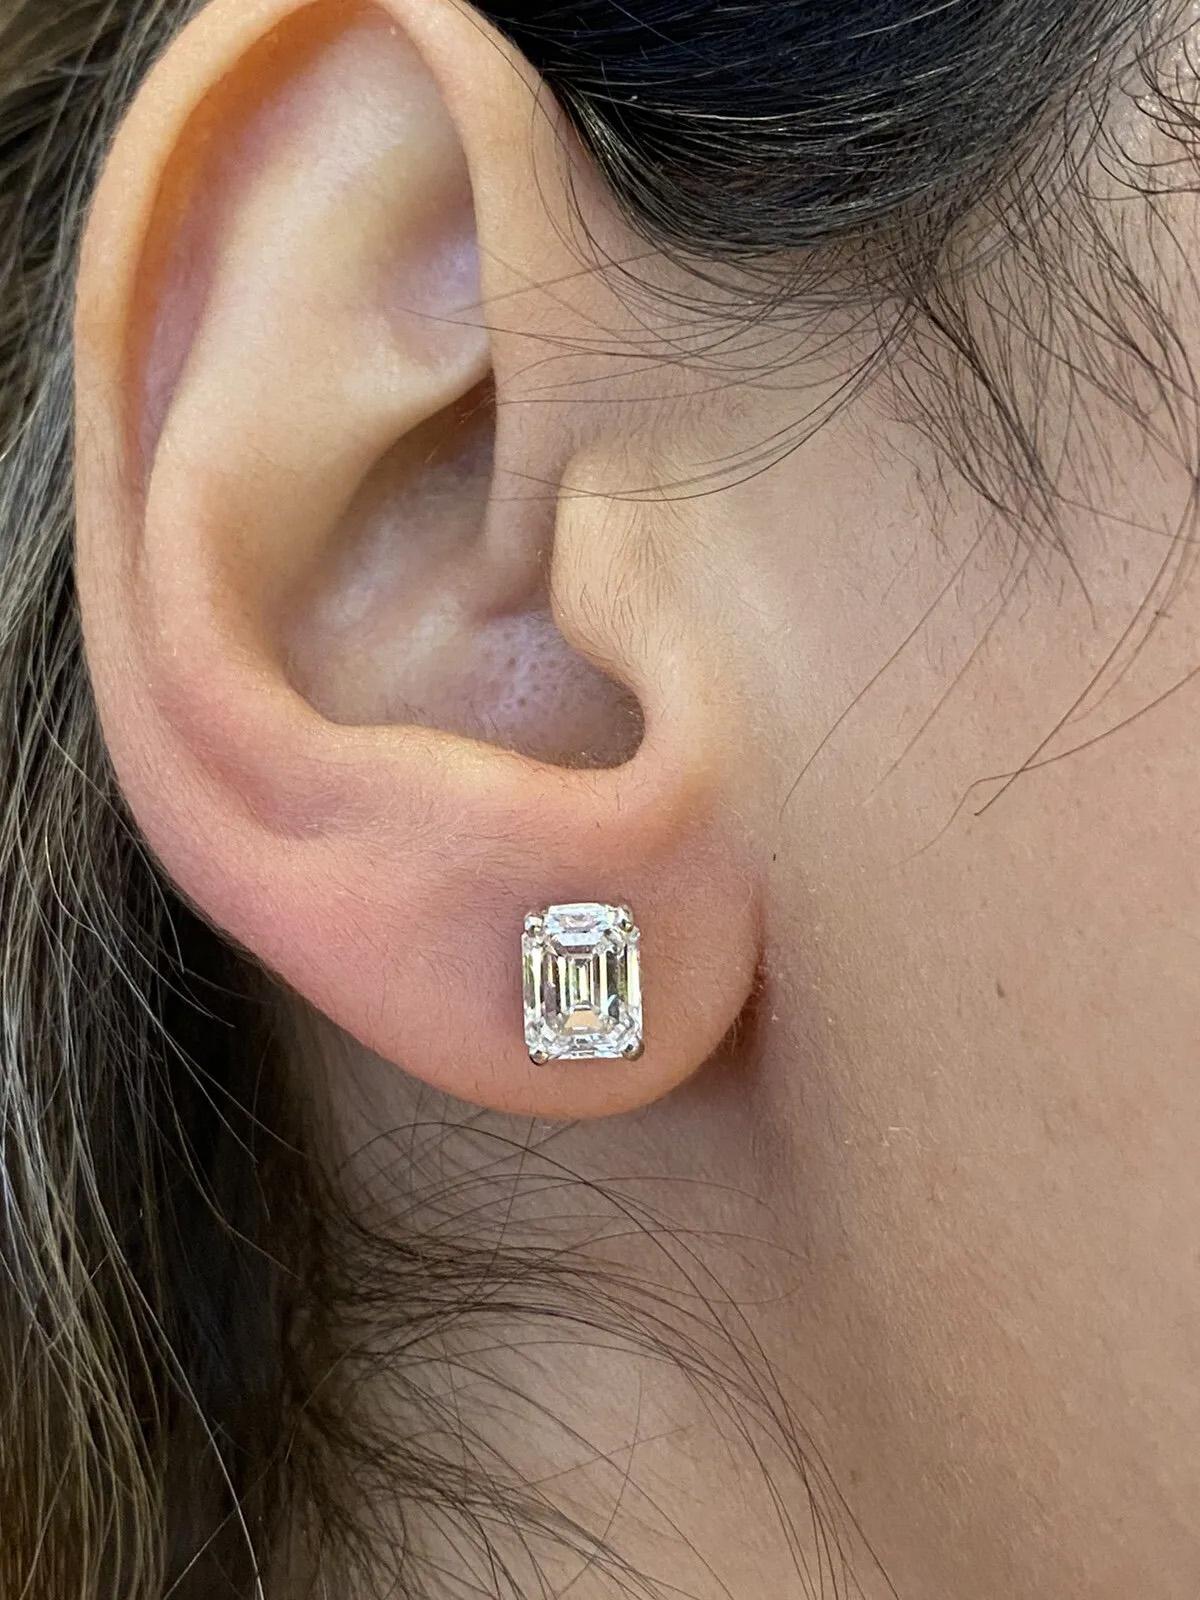 GIA Certified 2.56 carats total Emerald Cut Diamond Solitaire Earrings in 18k White Gold

Emerald Cut Diamond Solitaire Earrings features a pair of GIA Certified Emerald cut Diamond Studs set in 18k White Gold.

The first diamond has a weight of